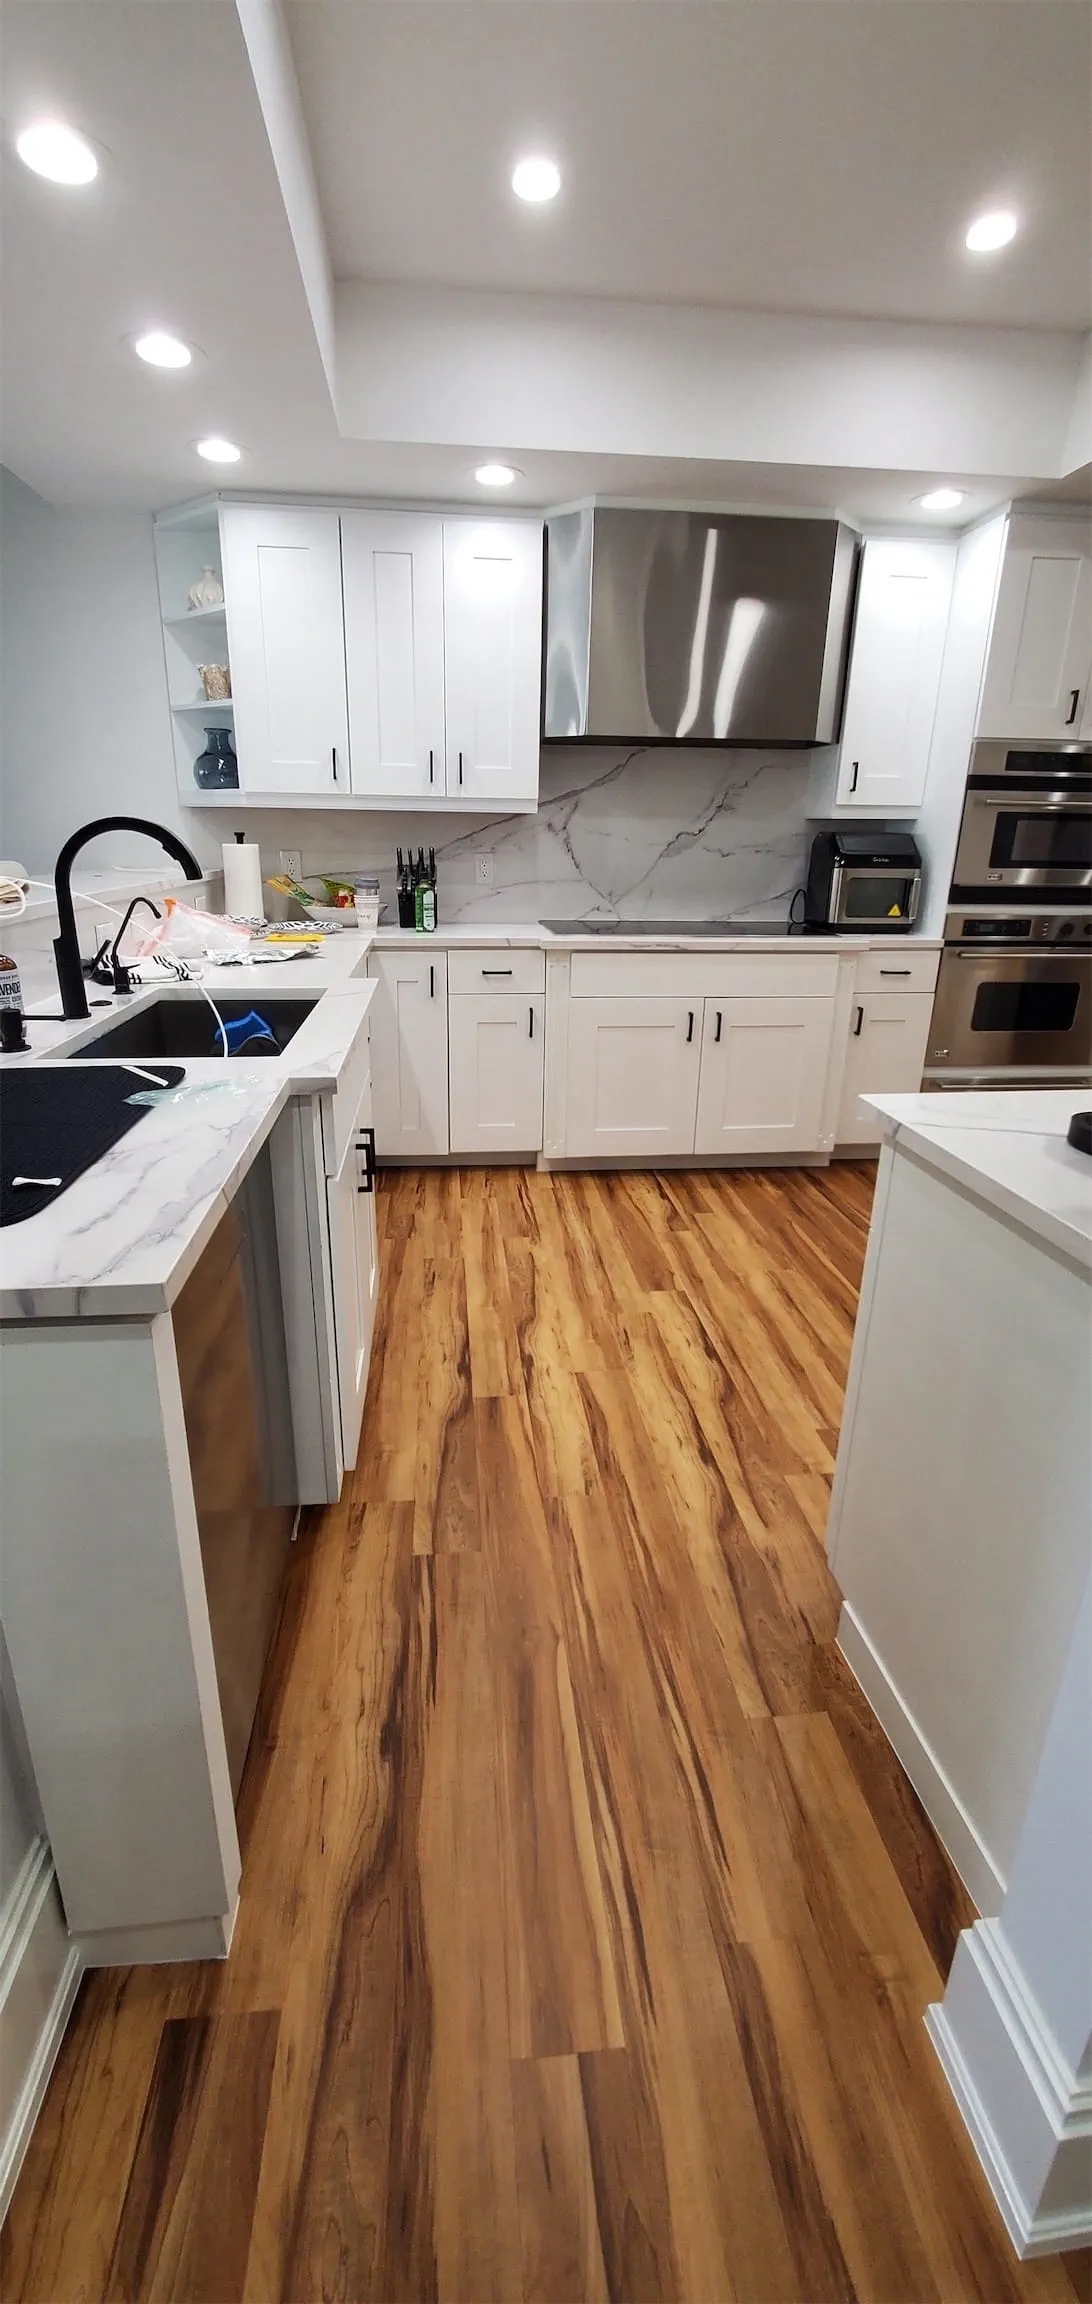 Wood-appearing floors and white cabinets